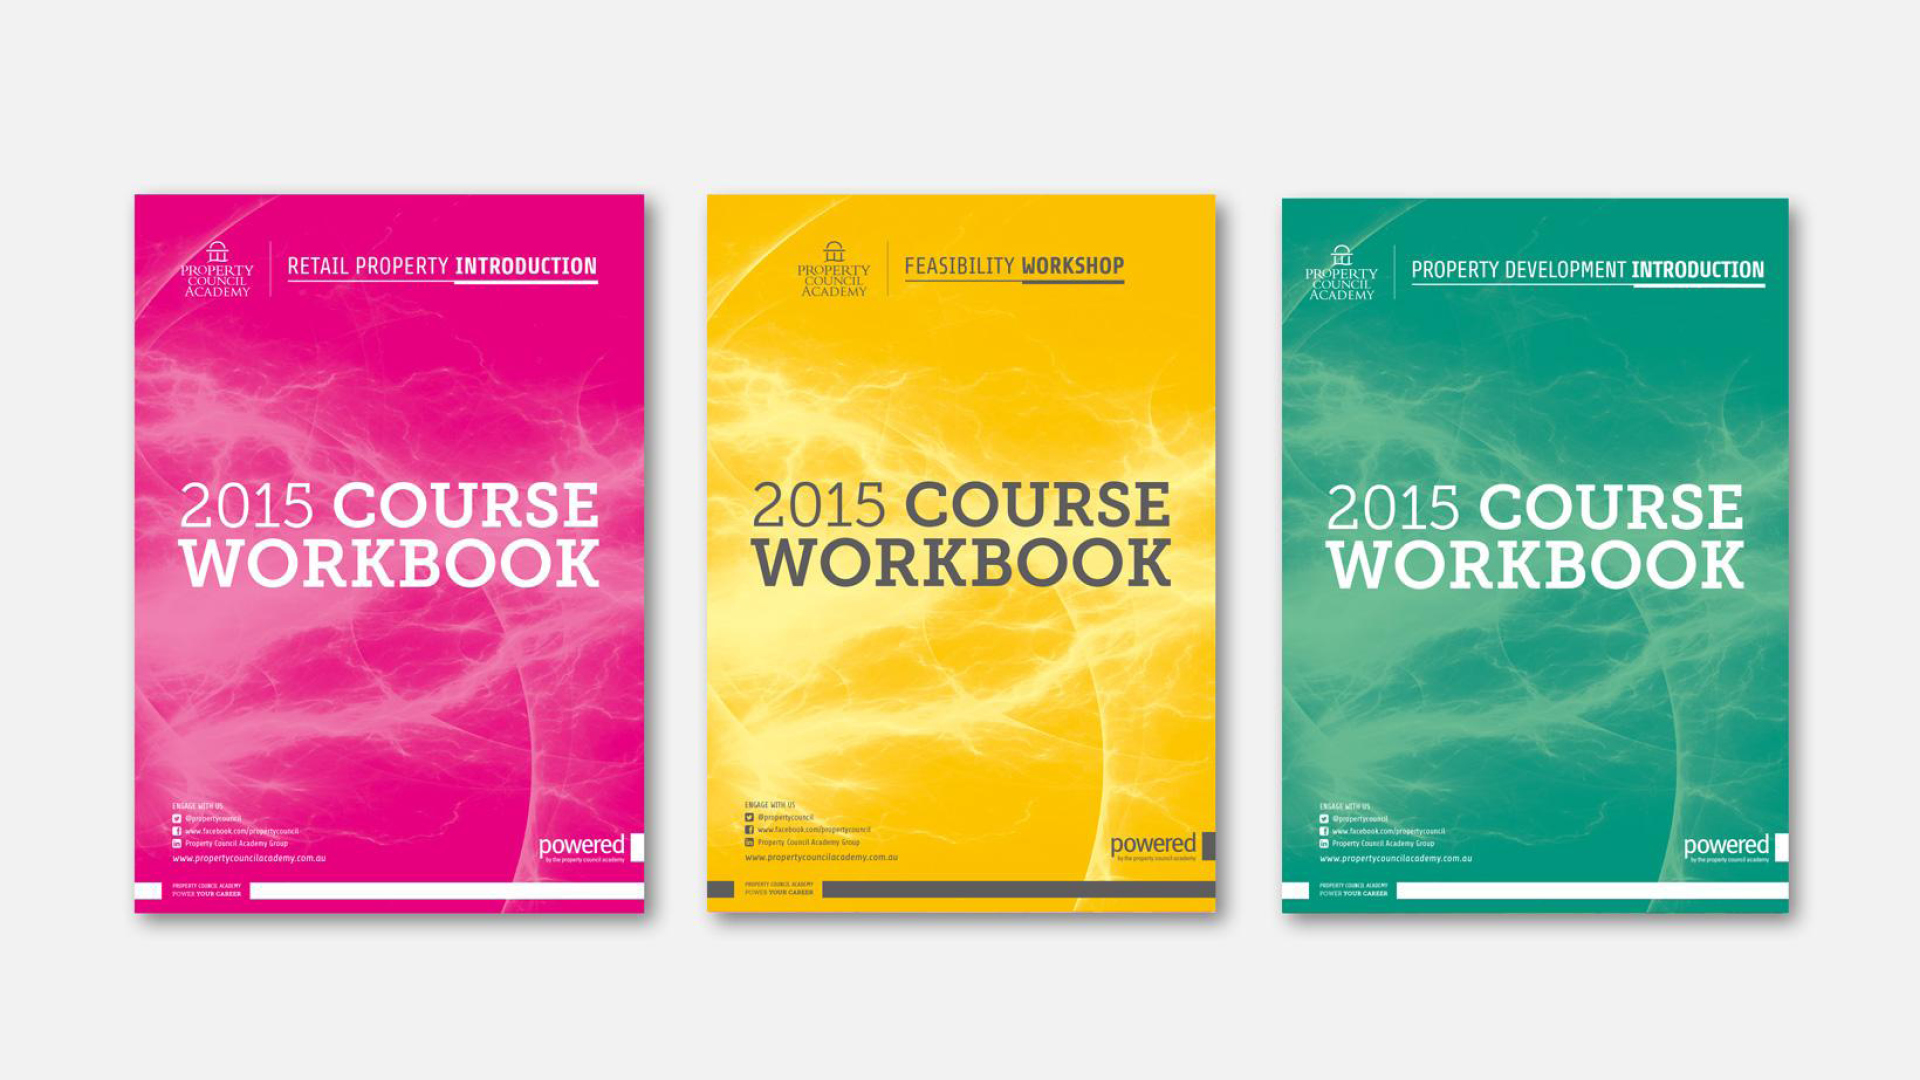 Property Council Academy Courses Collateral 2015 by Think Creative Agency13